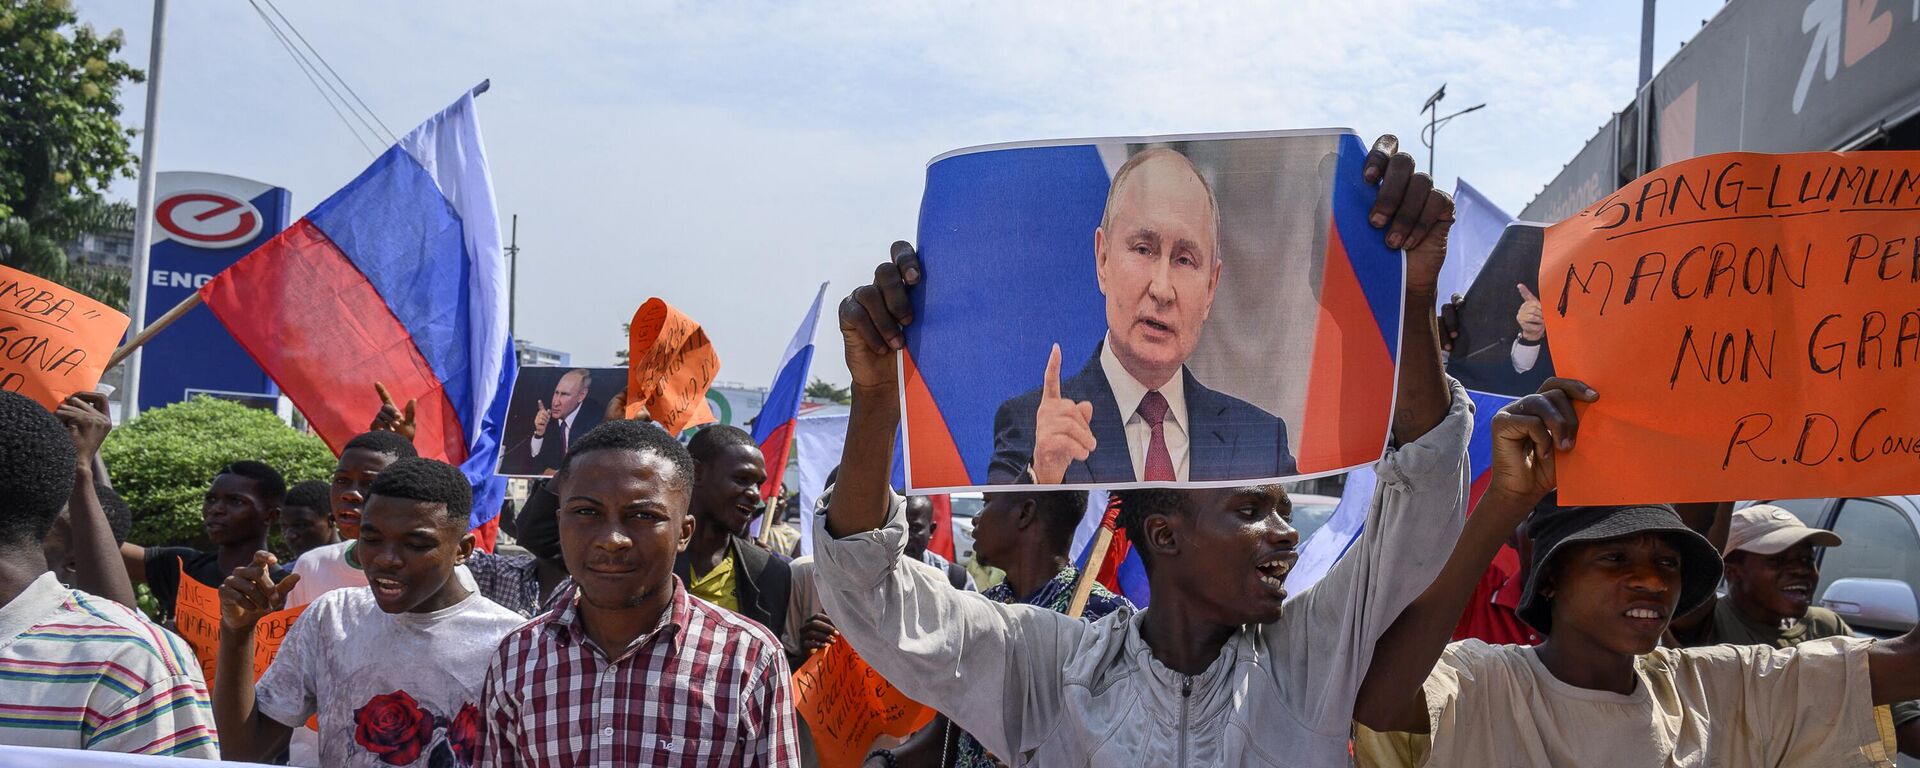 Protesters waving Russian flags and holding a portrait of Russian President Vladimir Putin gather in front of the French Embassy in Kinshasa on March 1, 2023 for a demonstration against the visit to the Democratic Republic of Congo of French President Emmanuel Macron - Sputnik International, 1920, 01.03.2023